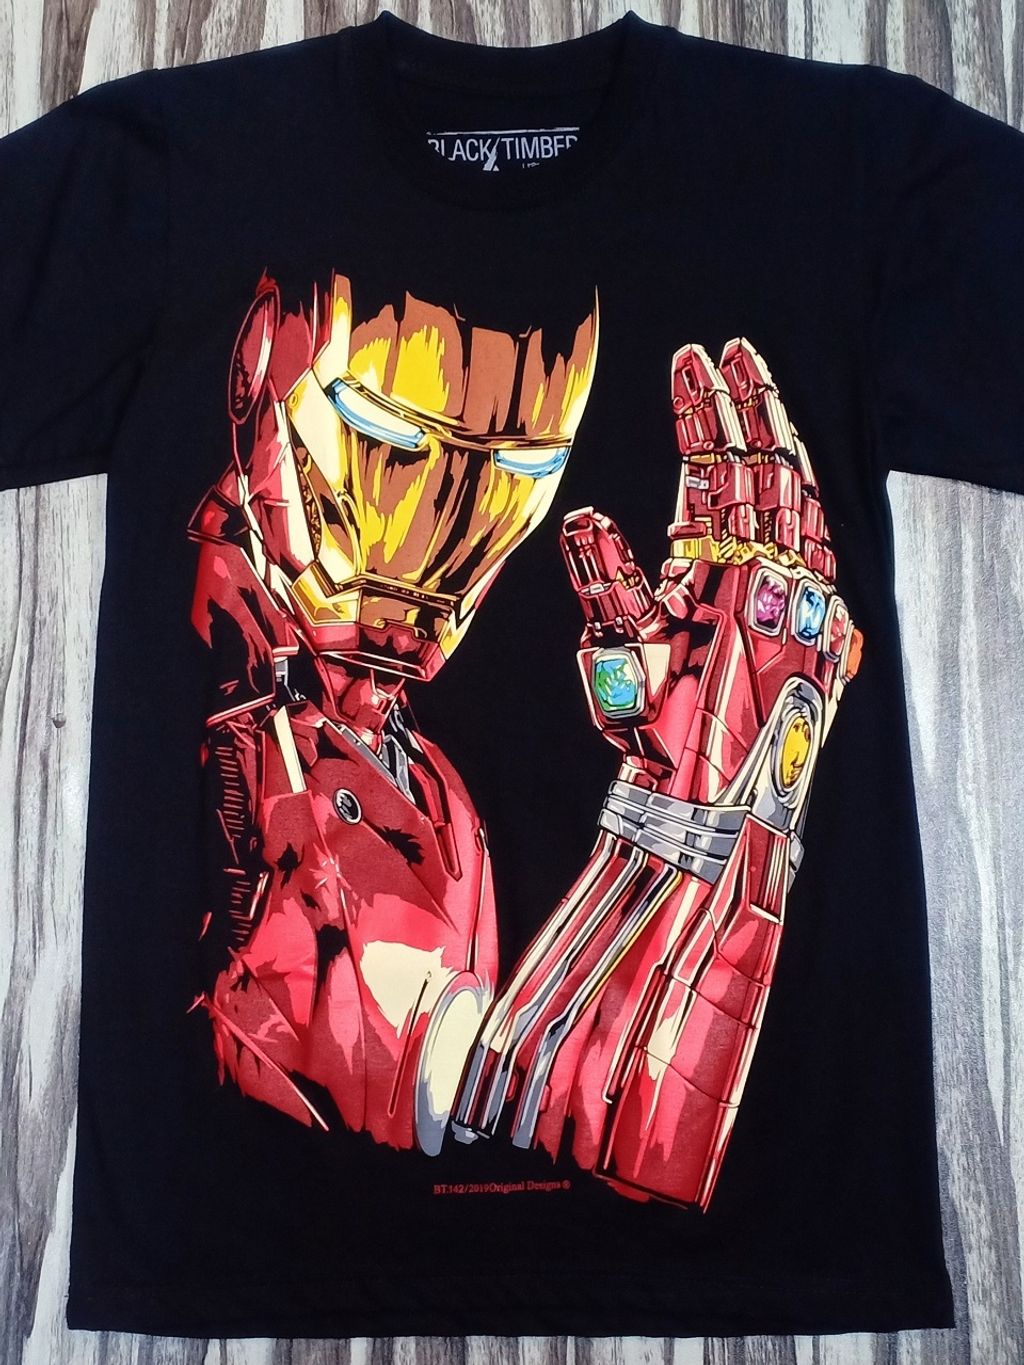 BT142 IRON MAN END GAME NANO GAUNTLET MARVEL UNIVERSE BLACK TIMBER HIGH  QUALITY SILK SCREEN COLLECTABLE COTTON T-SHIRT – PREMIUM GRADE BLACK TIMBER  NEW TYPE SYSTEM MOAI SPEED HIGH QUALITY SILK SCREEN